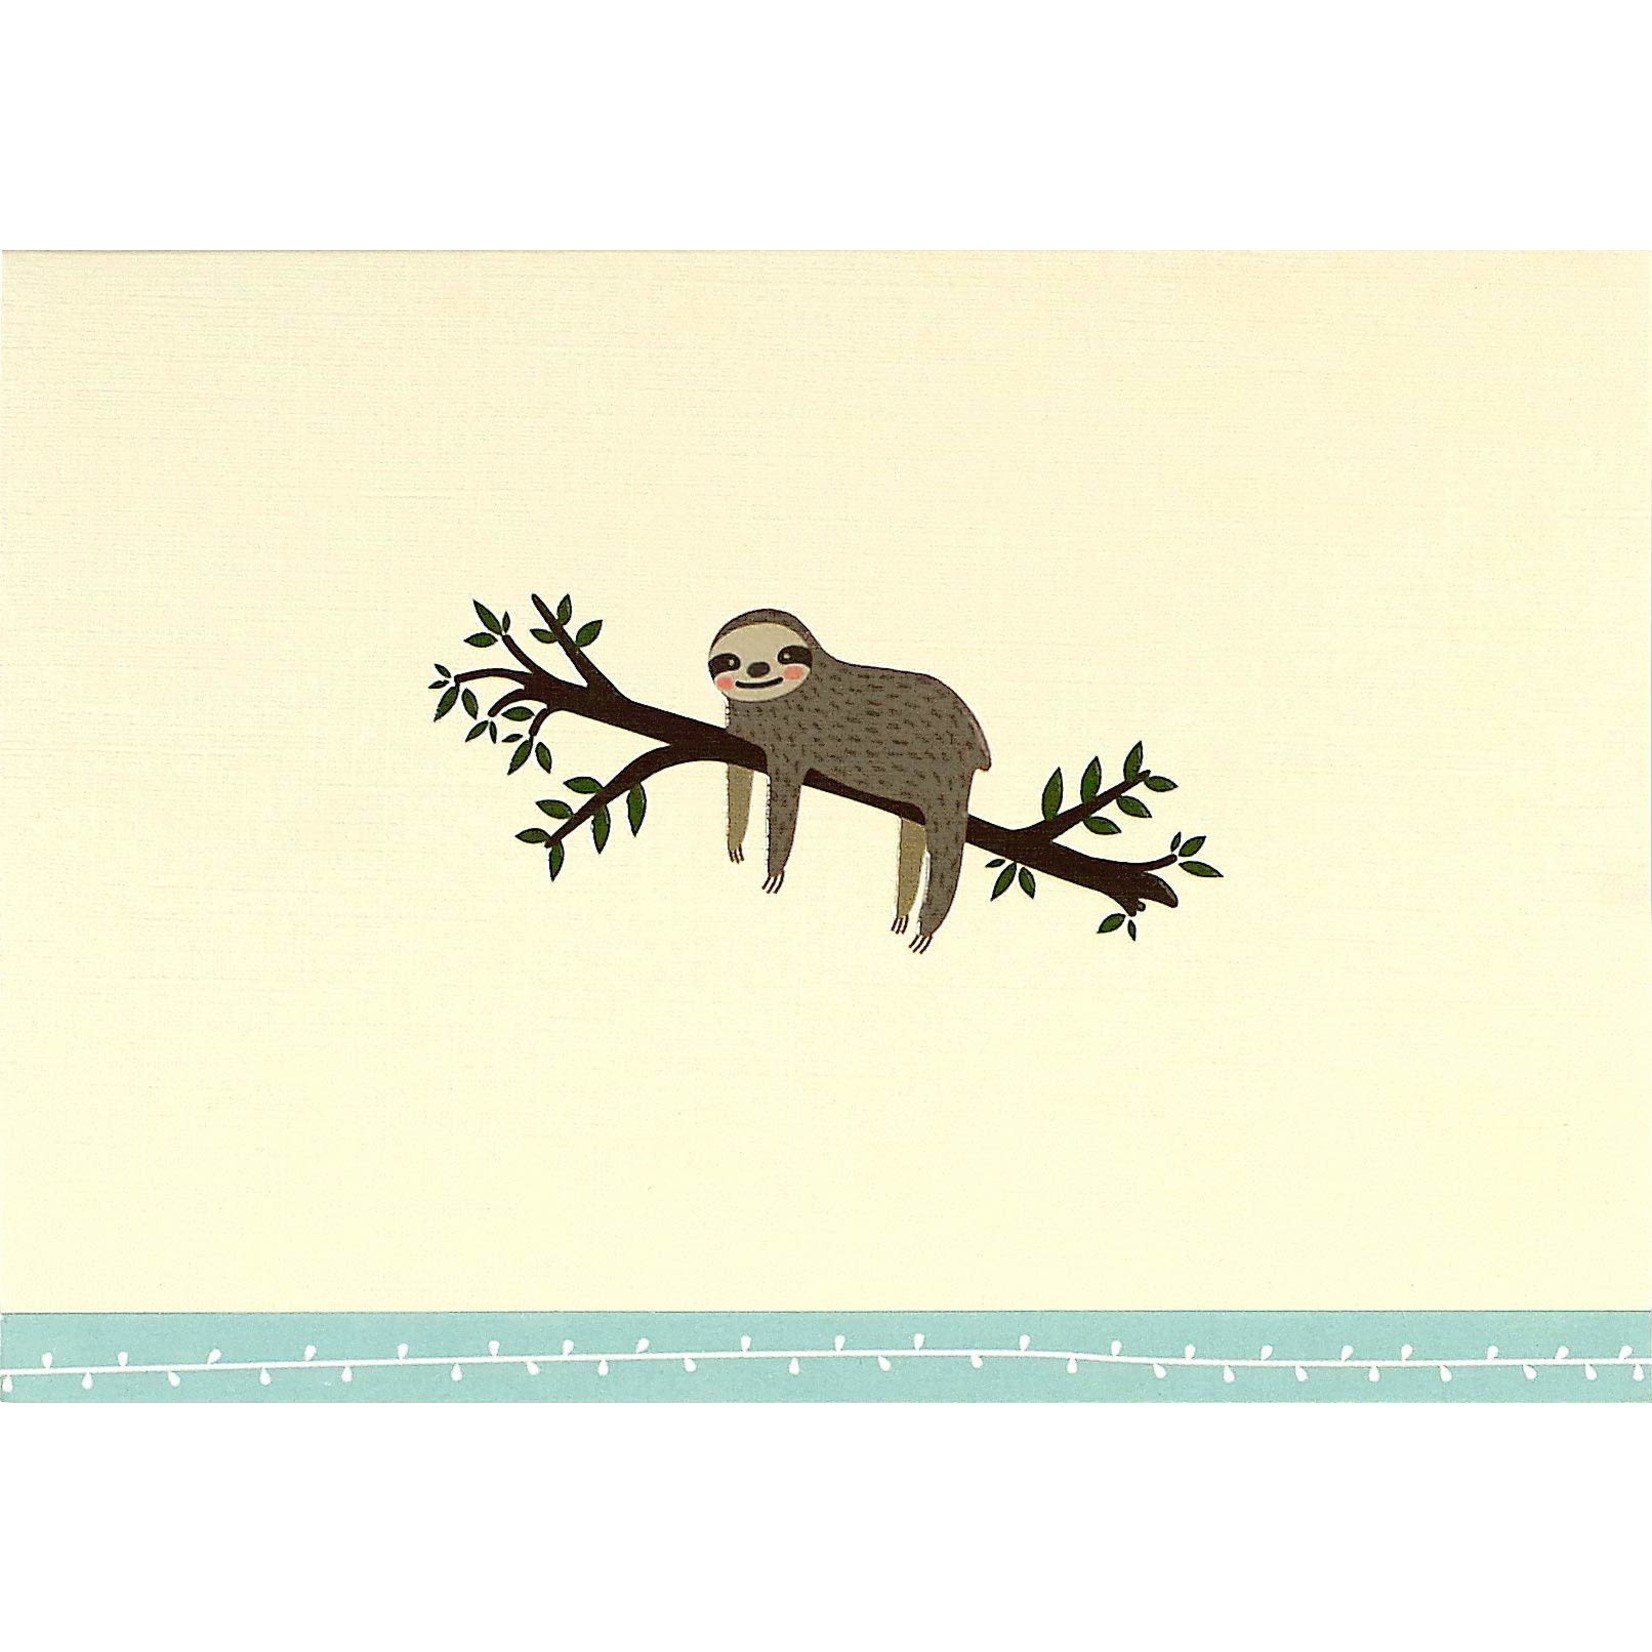 Peter Pauper Press Boxed Note Cards: Sloth